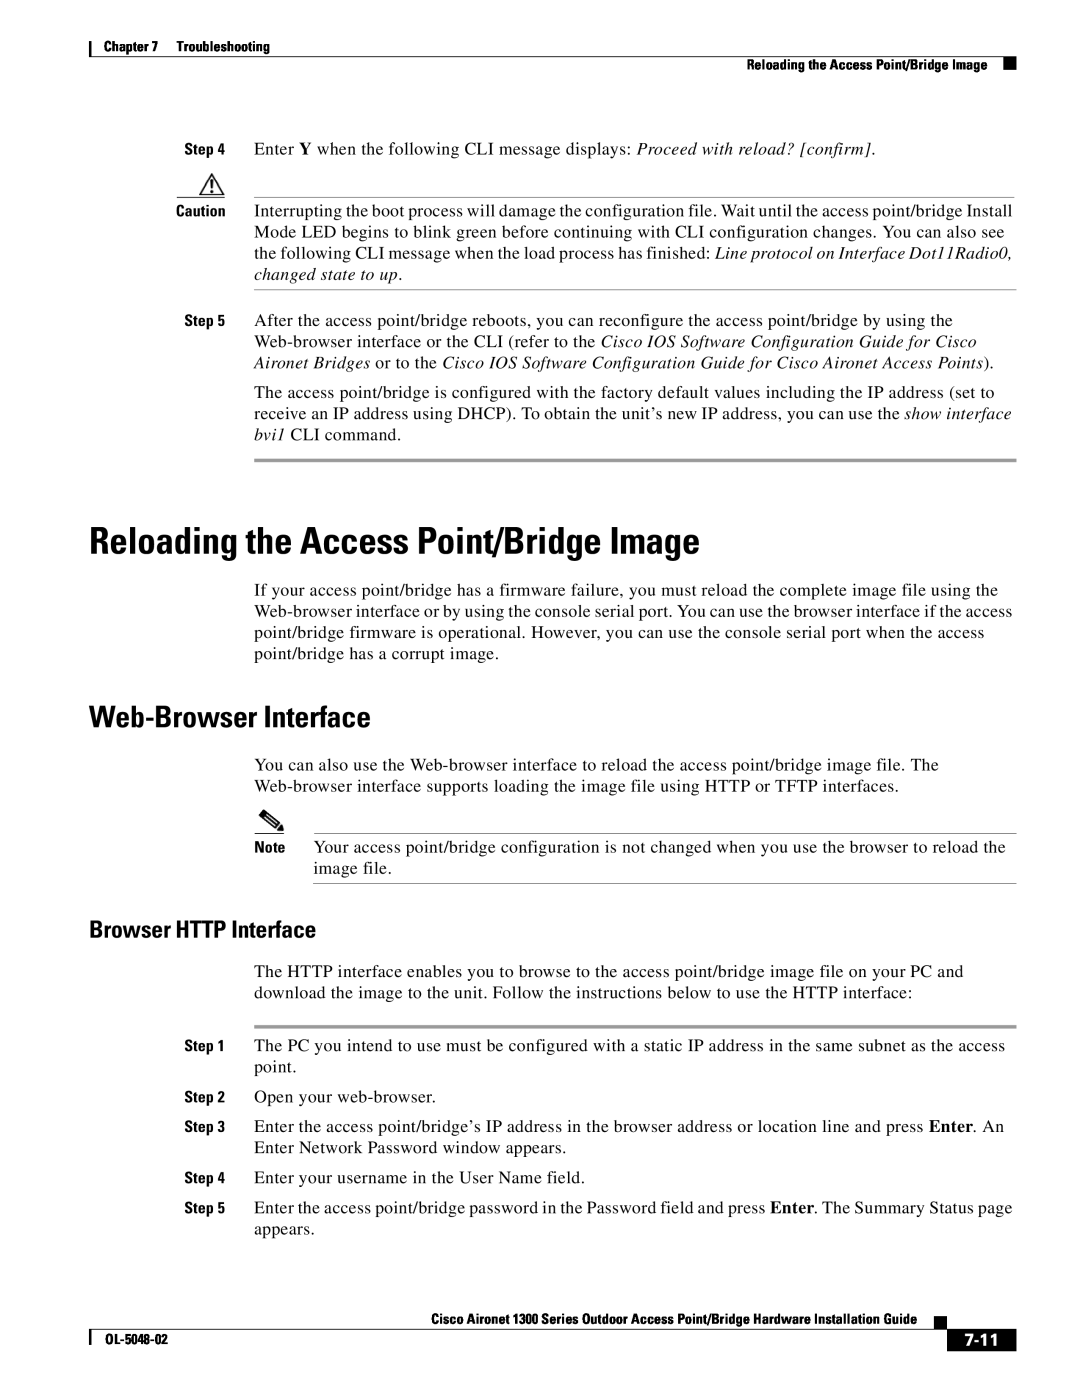 Cisco Systems 1300 Series Reloading the Access Point/Bridge Image, Web-Browser Interface, Browser HTTP Interface, 7-11 